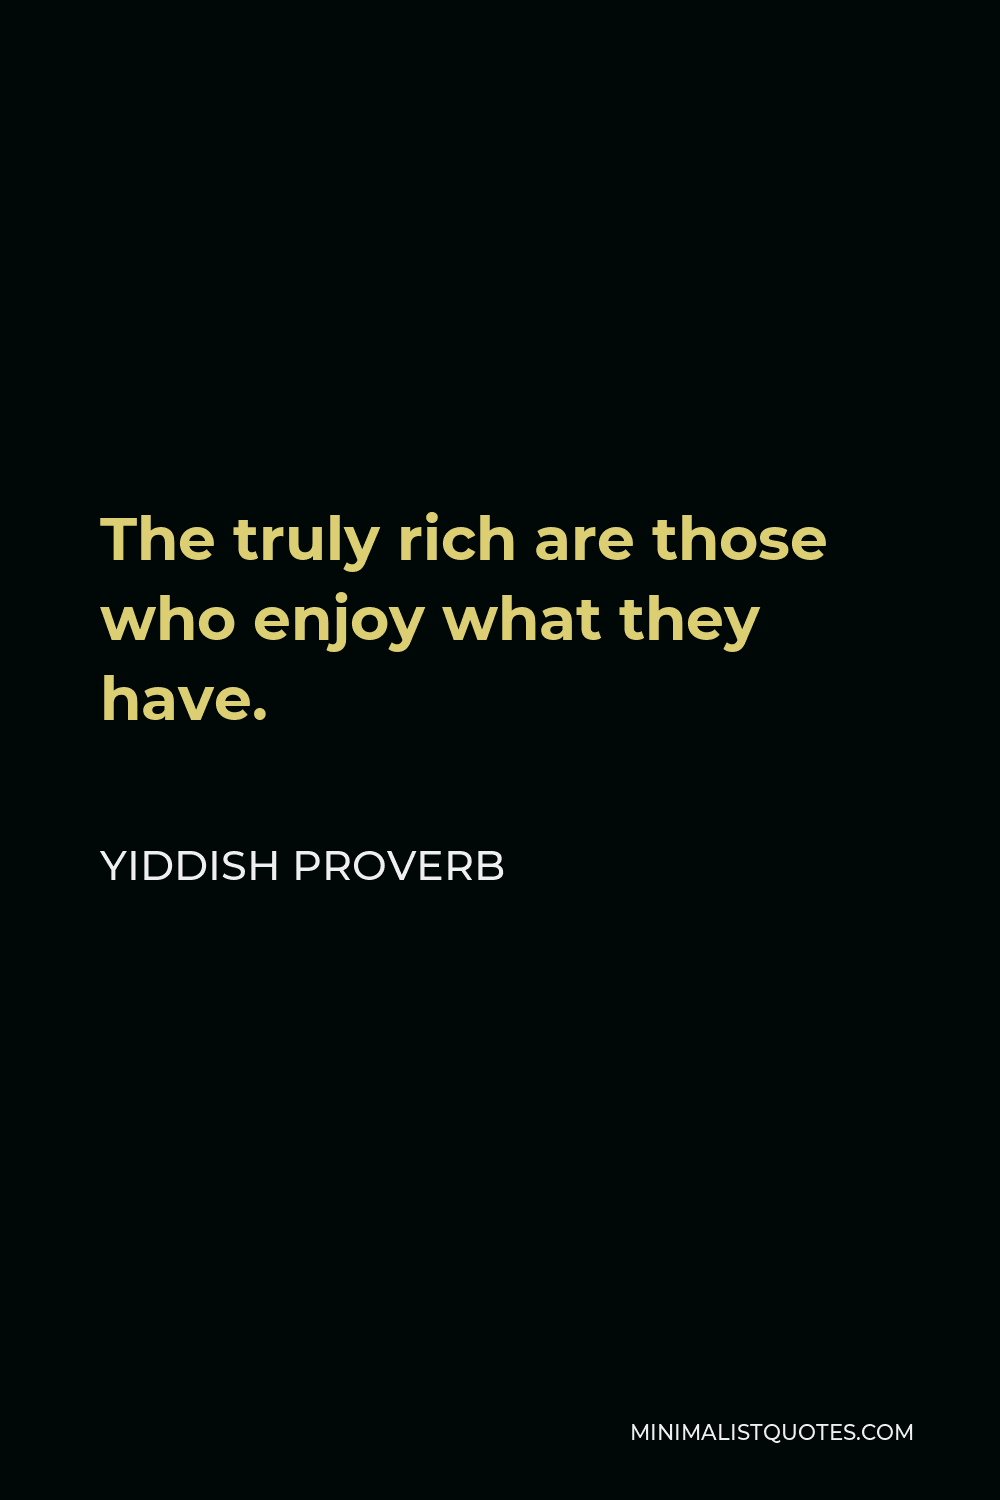 Yiddish Proverb Quote - The truly rich are those who enjoy what they have.